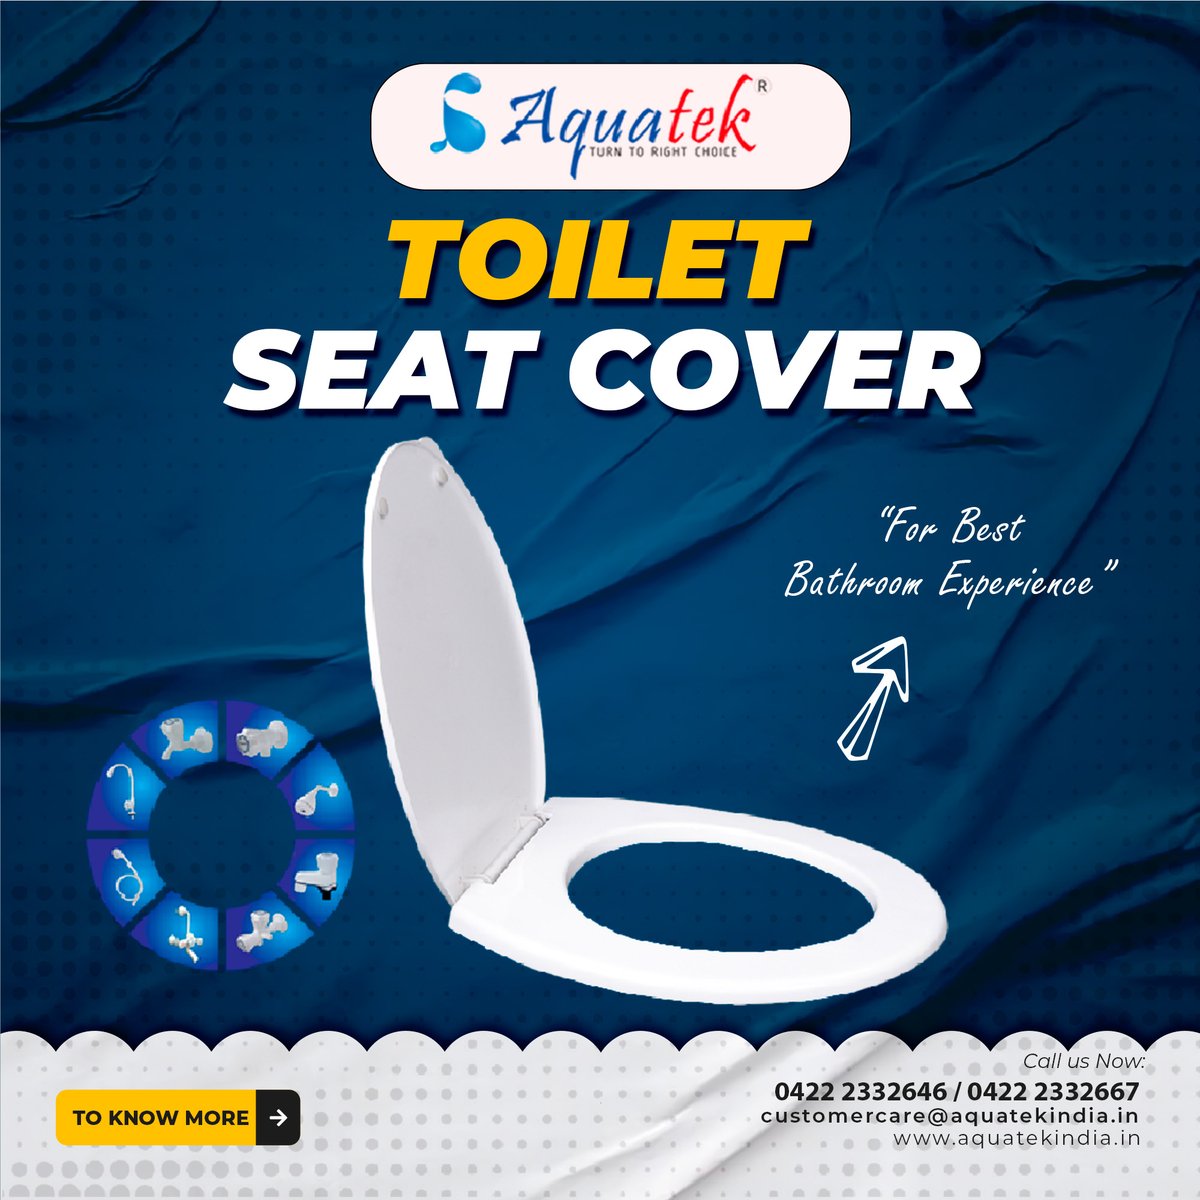 Upgrade your bathroom experience with our premium Toilet Seat Cover. Enjoy comfort, hygiene, and style in one sleek package.
Explore more at: aquatekindia.in/products
#ToiletSeatCover #BathroomComfort #Hygiene #Sanitaryware #Aquatek #BuildingIndustry #Plumbing #Distribution